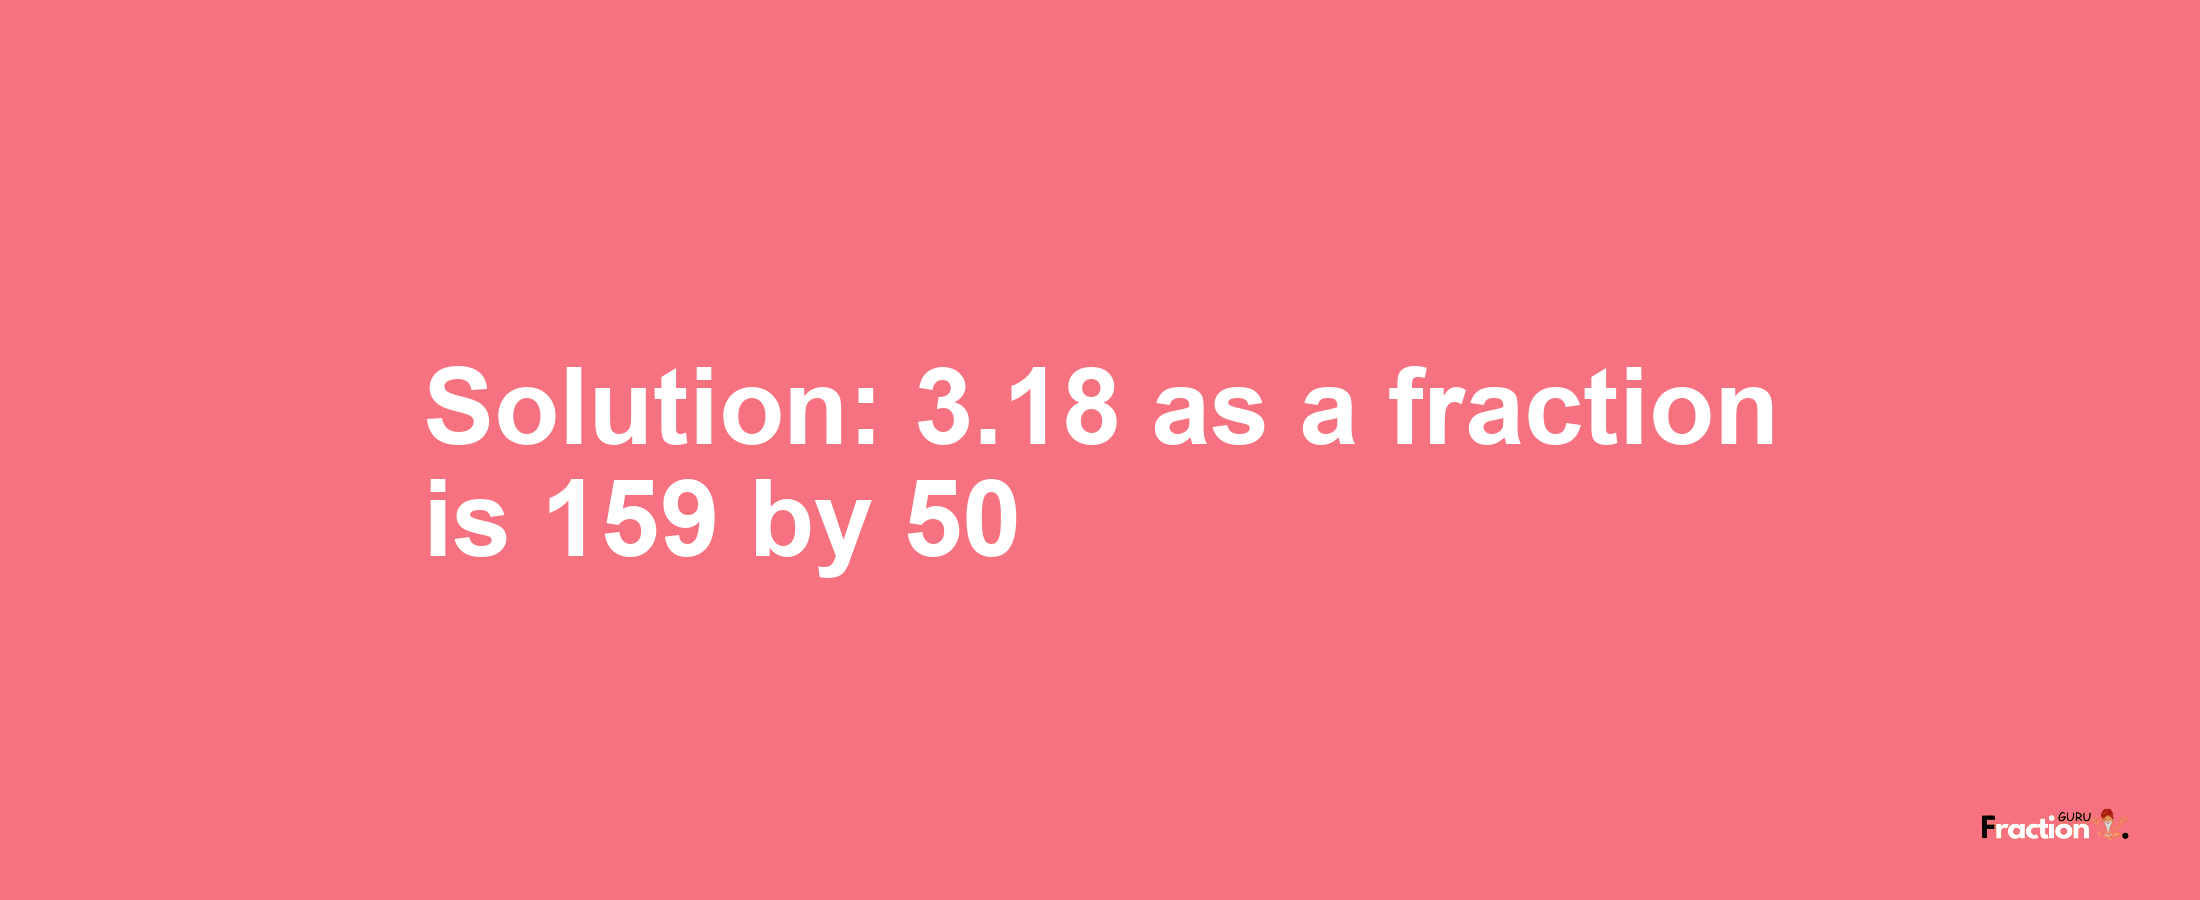 Solution:3.18 as a fraction is 159/50